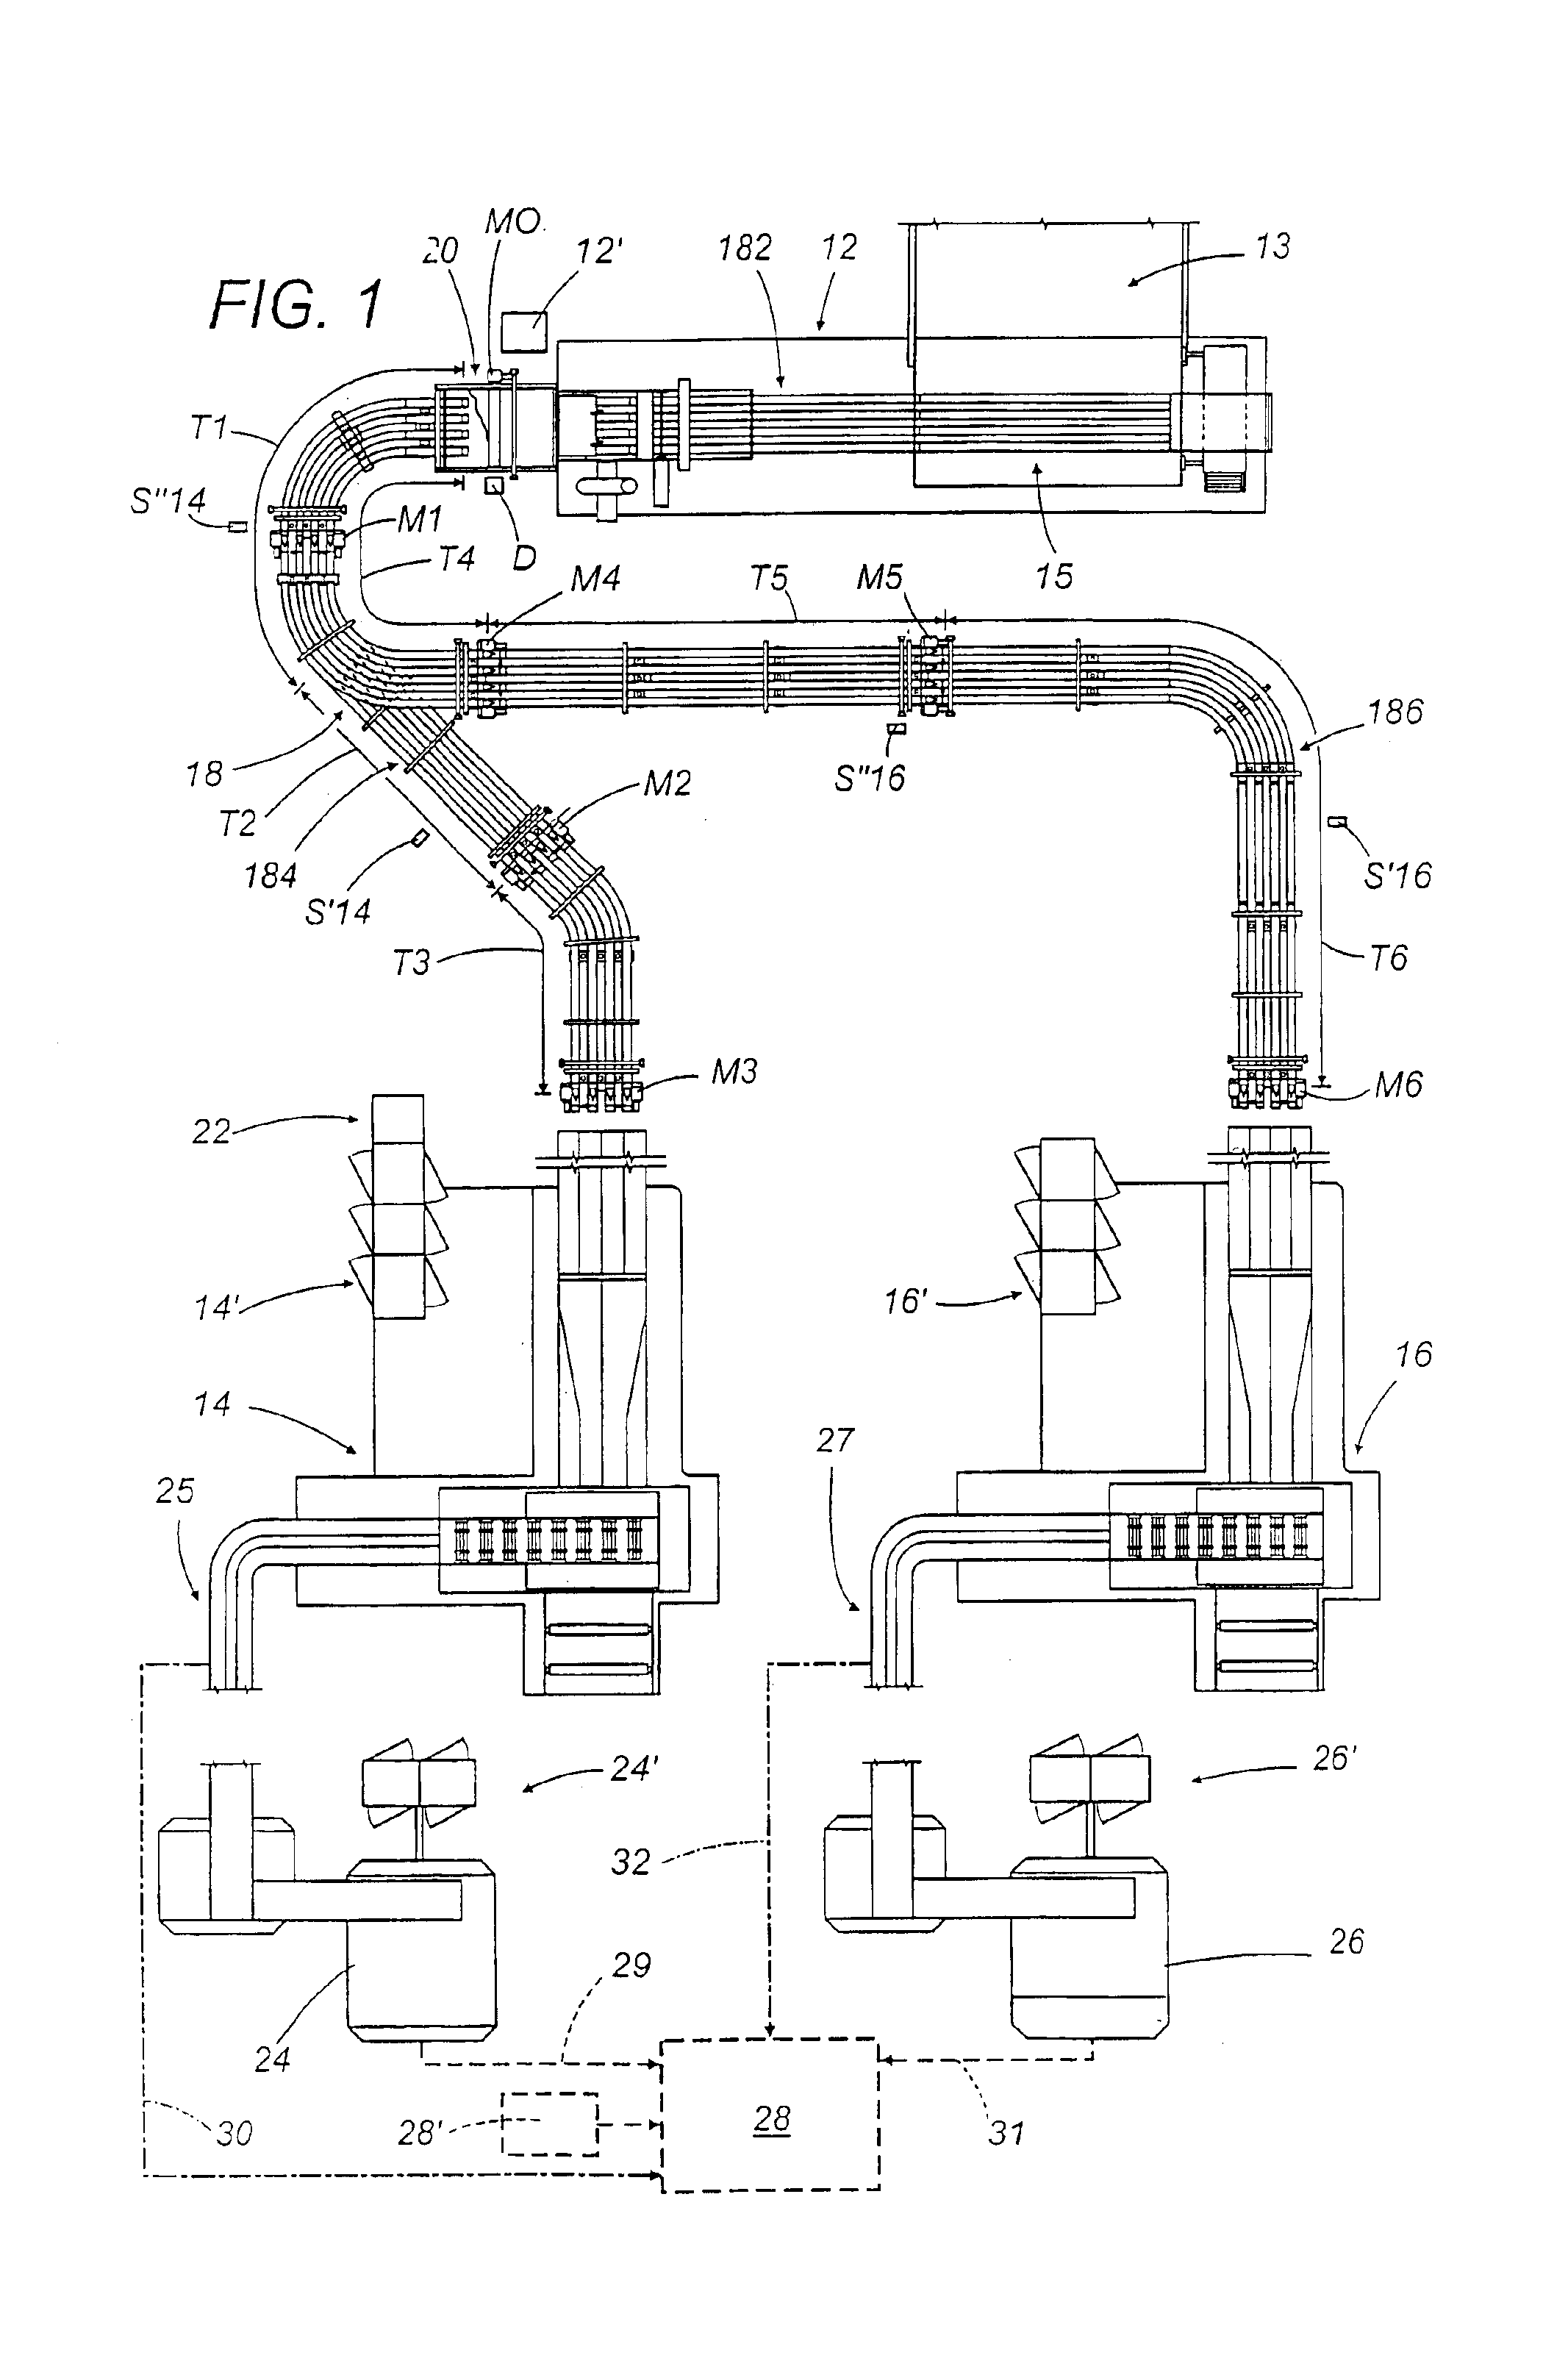 Method and a plant for producing articles, in particular paper rolls or the like, and a conveying apparatus usable in said plant